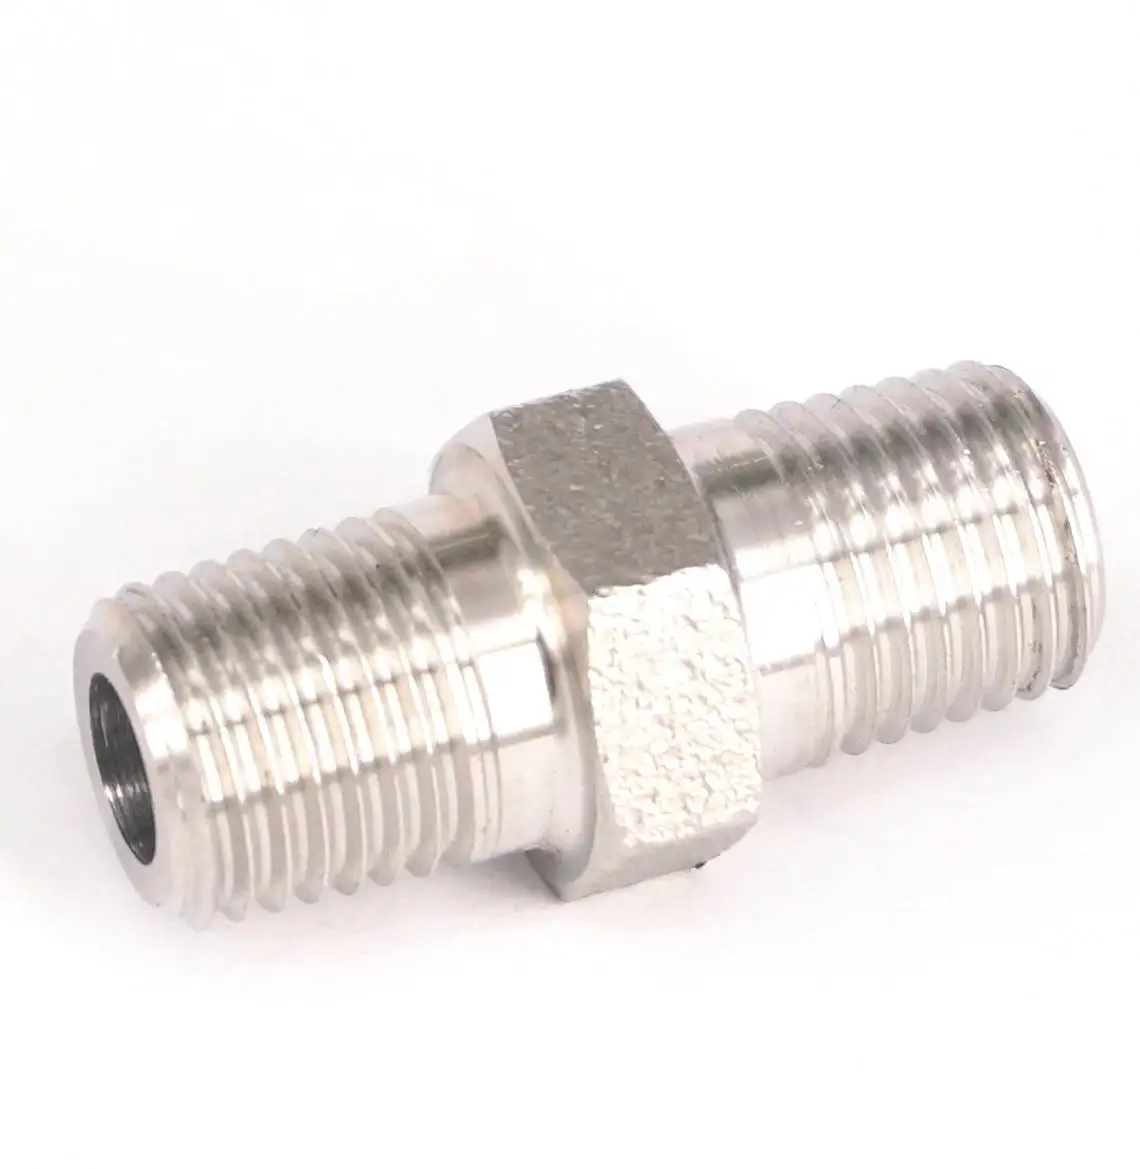 1/4"Male x 1/4" Male Threaded Pipe Fitting Stainless Steel SS304 NPT QH 